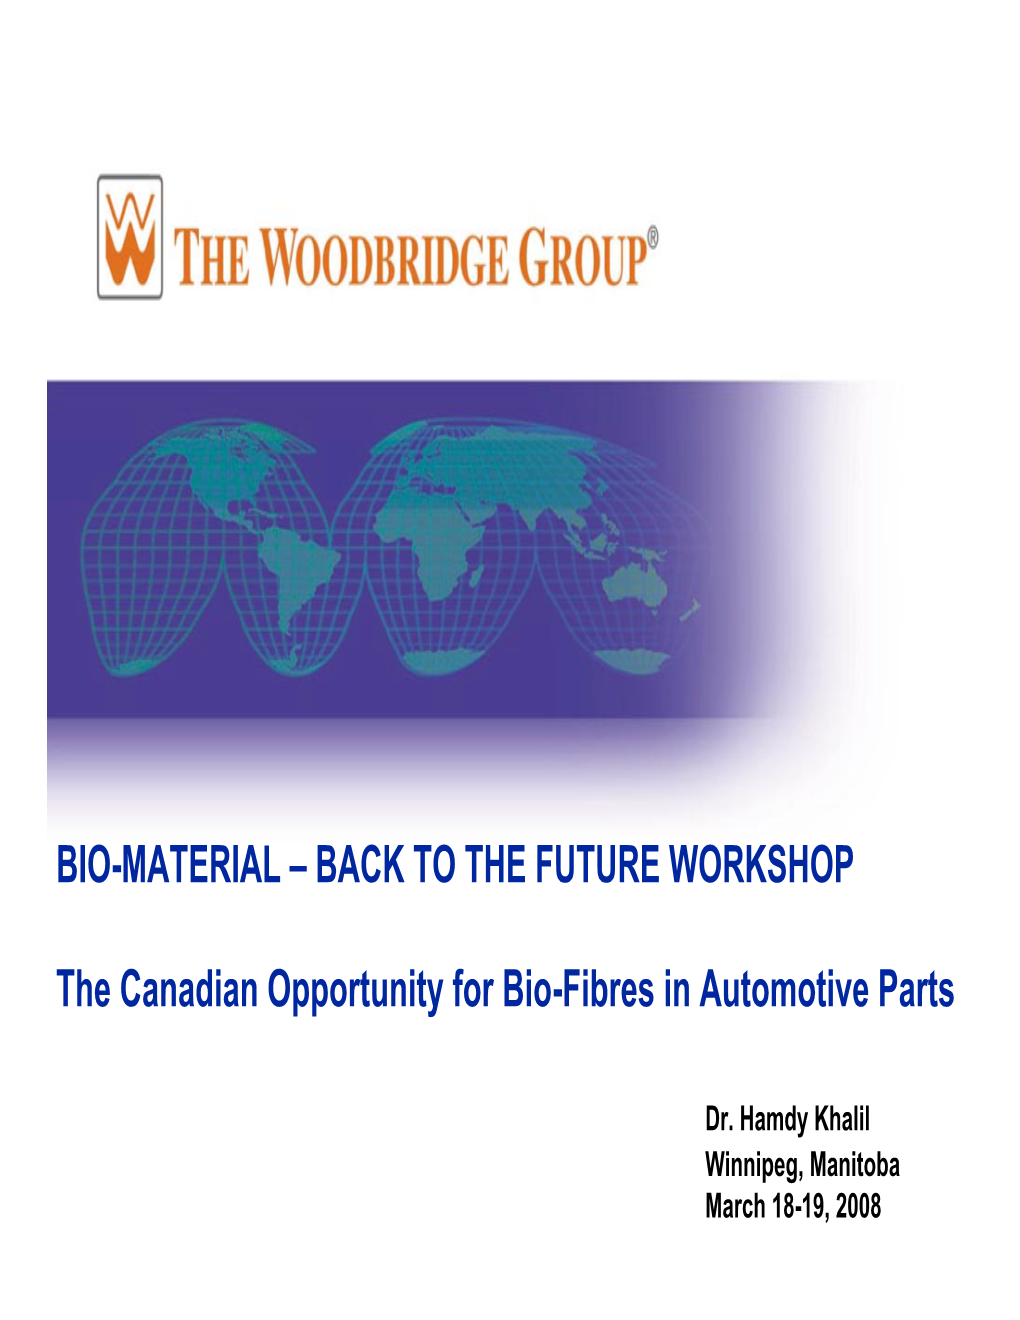 THE FUTURE WORKSHOP the Canadian Opportunity for Bio